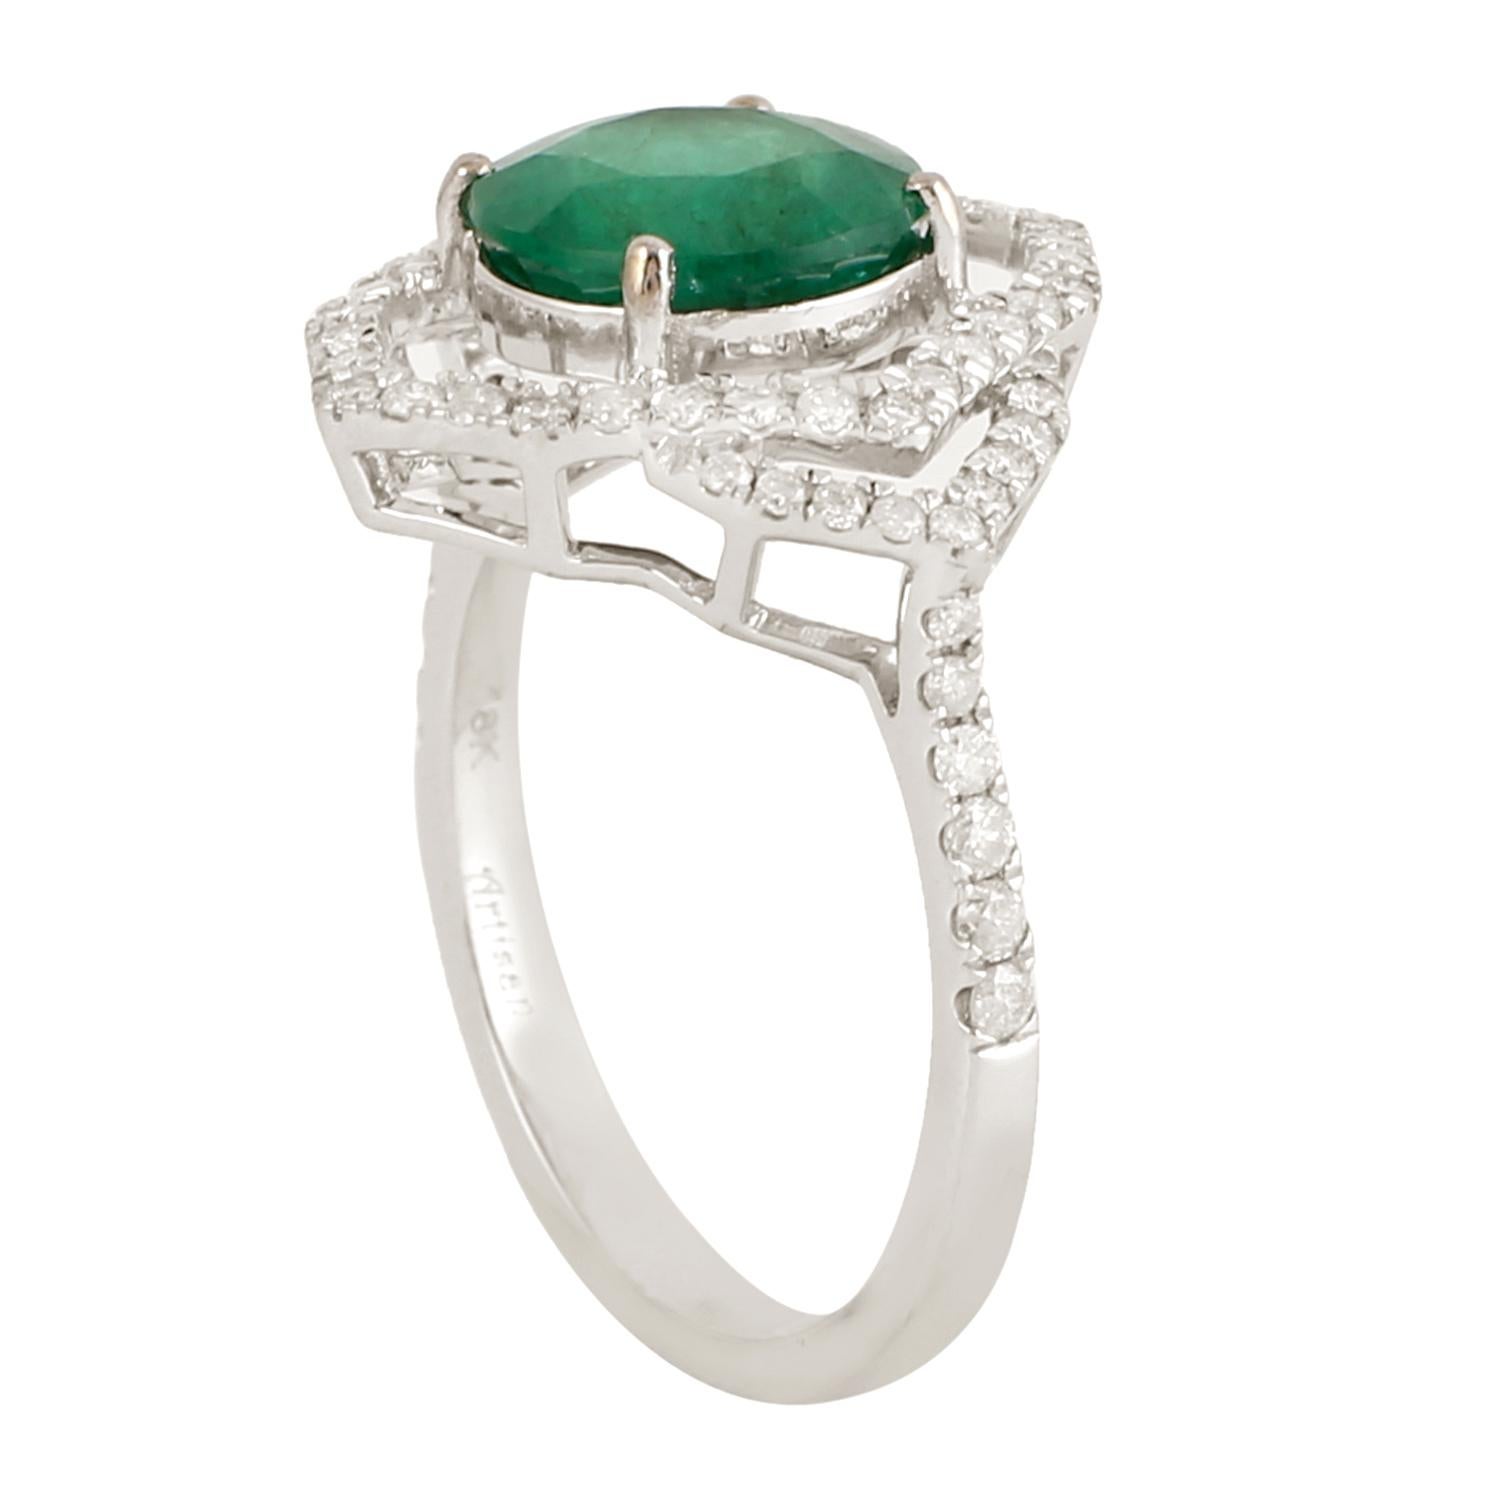 Mixed Cut Natural Emerald Cocktail Ring With Halo Diamonds Made In 18K White Gold For Sale